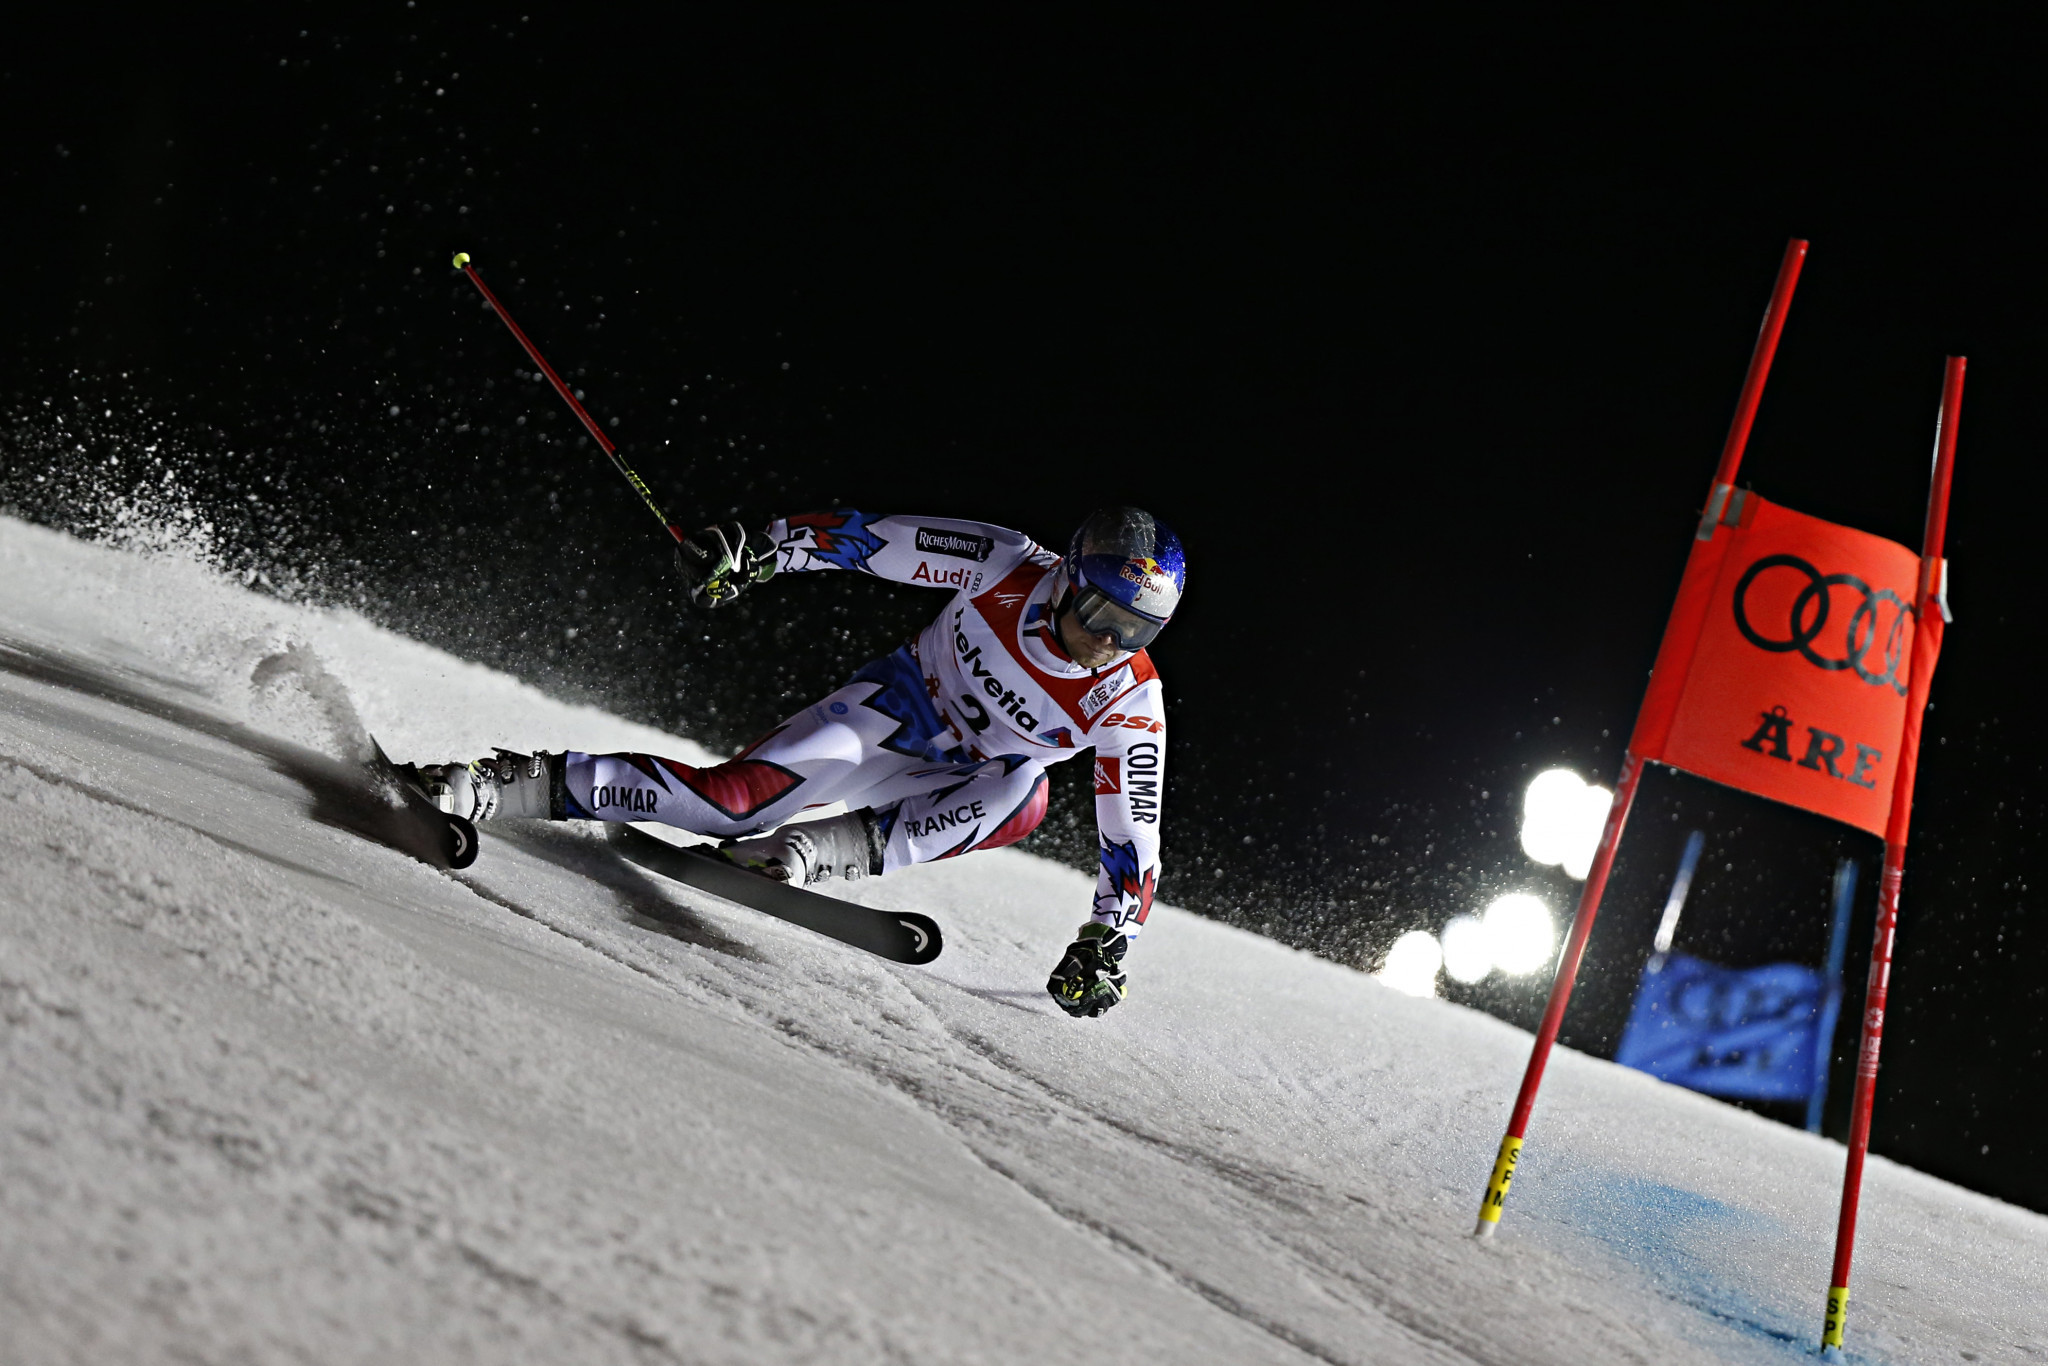 France’s Alexis Pinturault led after the first run but finished third overall, 0.42 seconds back ©Getty Images